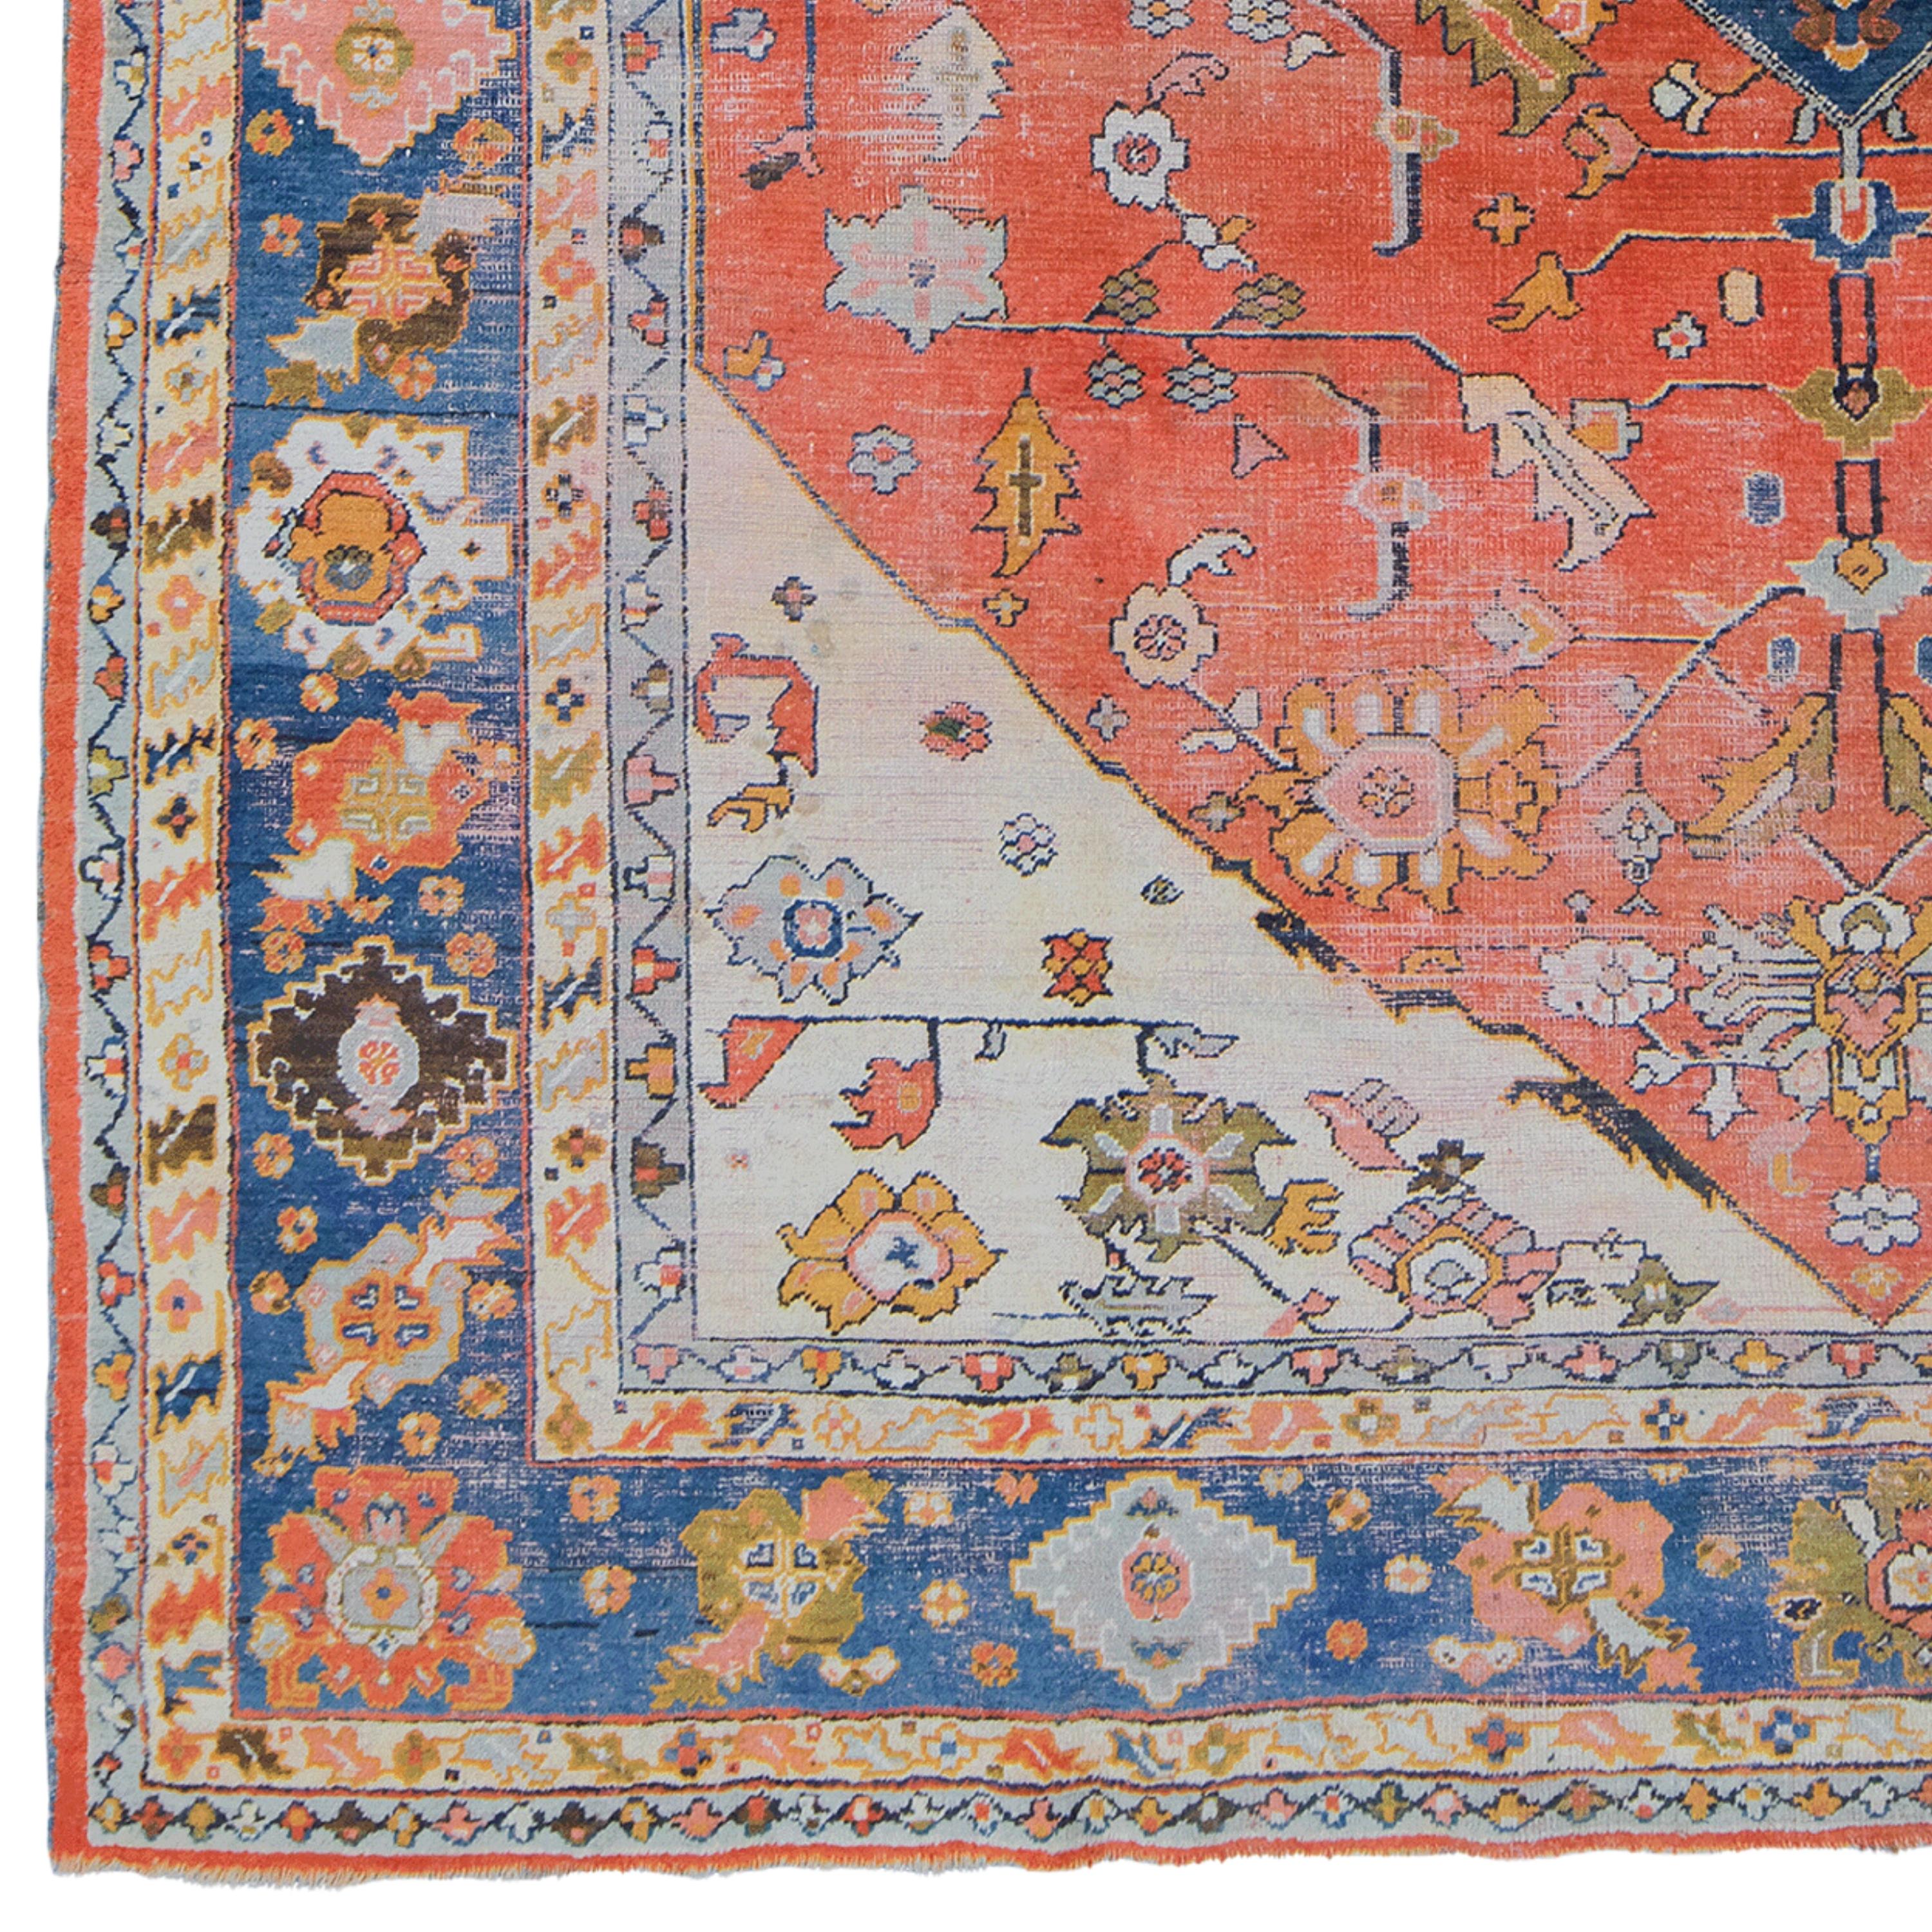 This elegant antique Turkish Uşak carpet dates from the late 19th century and displays the finest craftsmanship of its period. With its rich color palette and detailed patterns, this rug can turn any space into a sophisticated art gallery. Thanks to